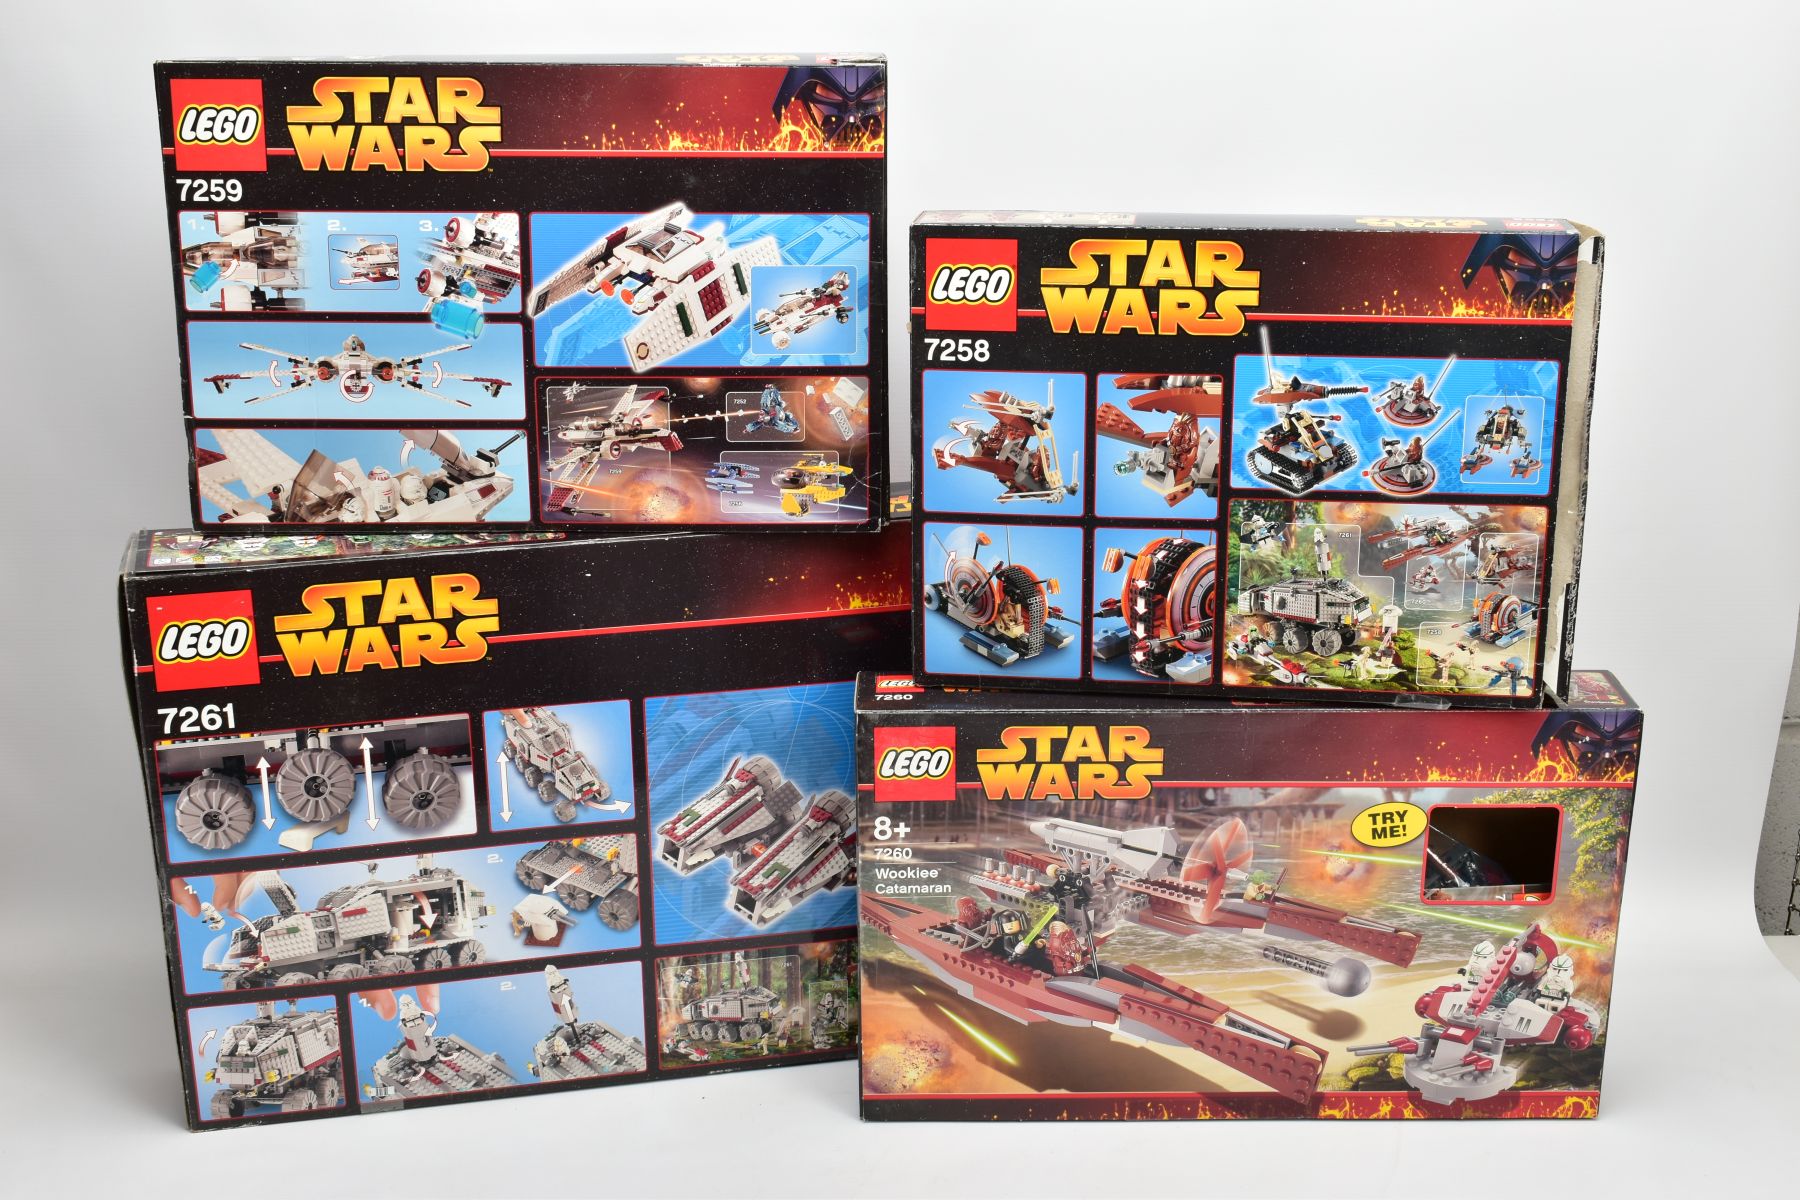 FOUR BOXED LEGO STAR WARS SETS, 7258 WOOKIE ATTACK, 7259 ARC-170 STAR FIGHTER, 7260 WOOKIE CATAMARAN - Image 2 of 3